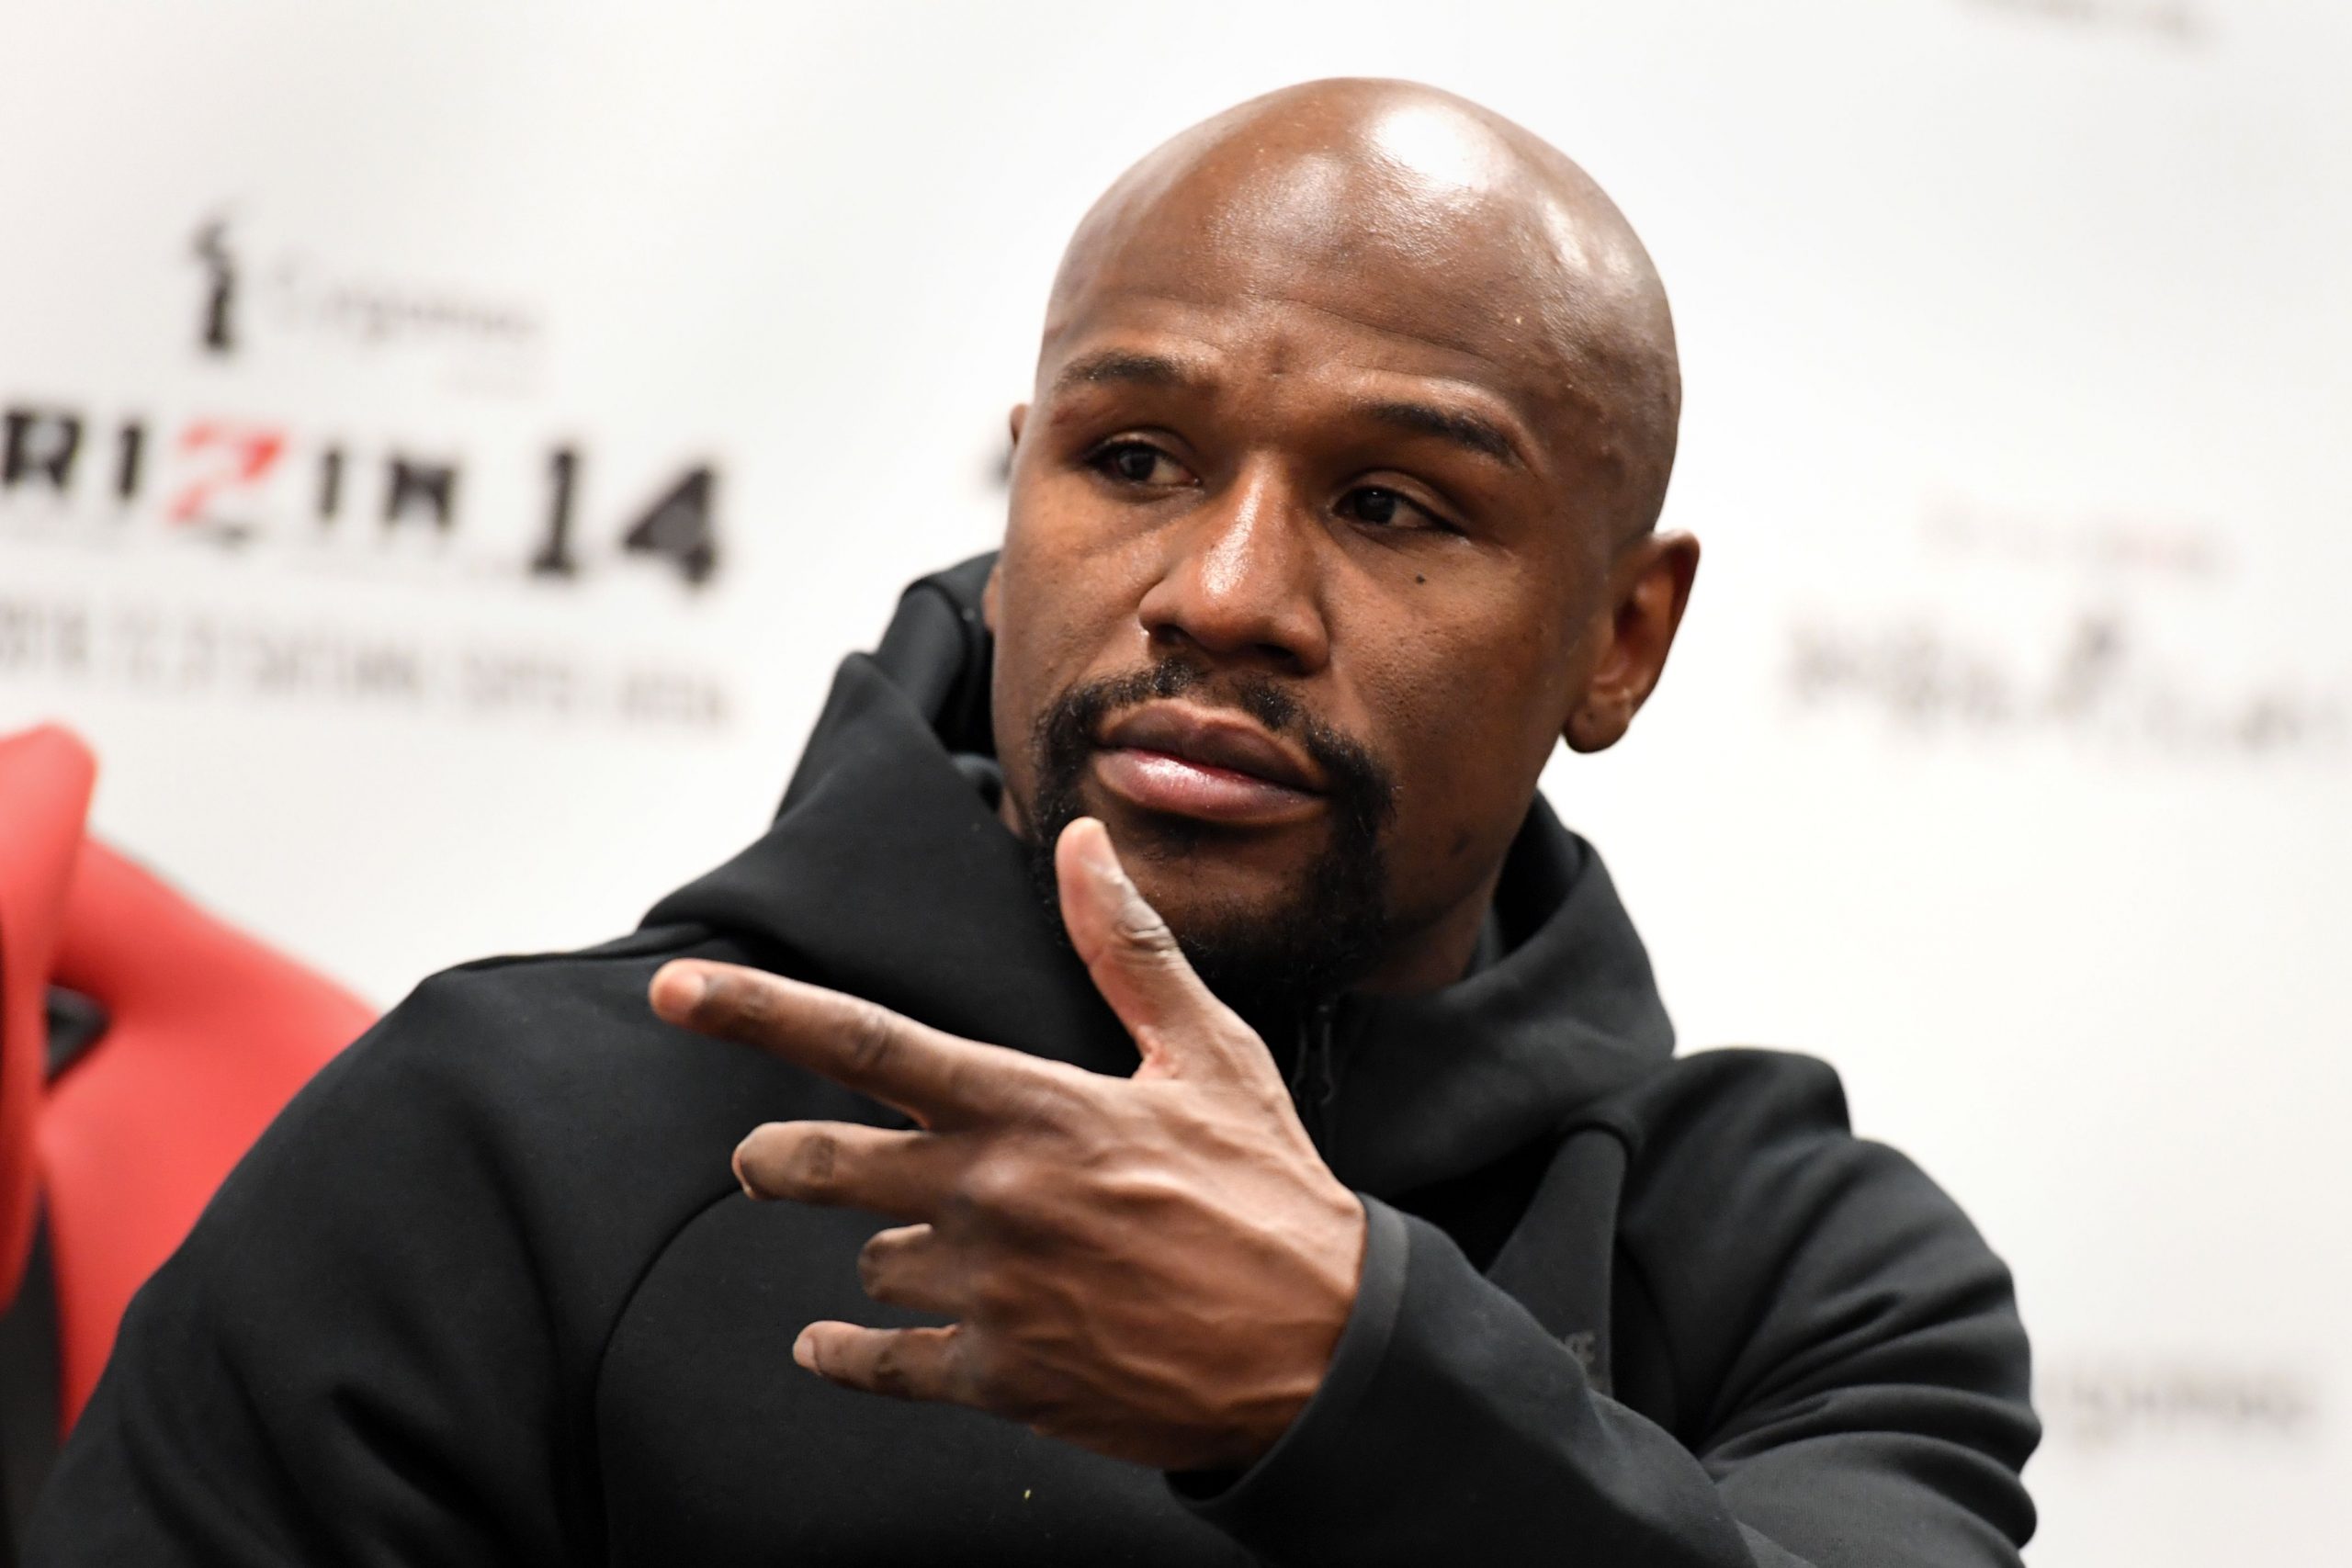 $100,000 from Floyd Mayweather for information on the robbery of his Vegas home